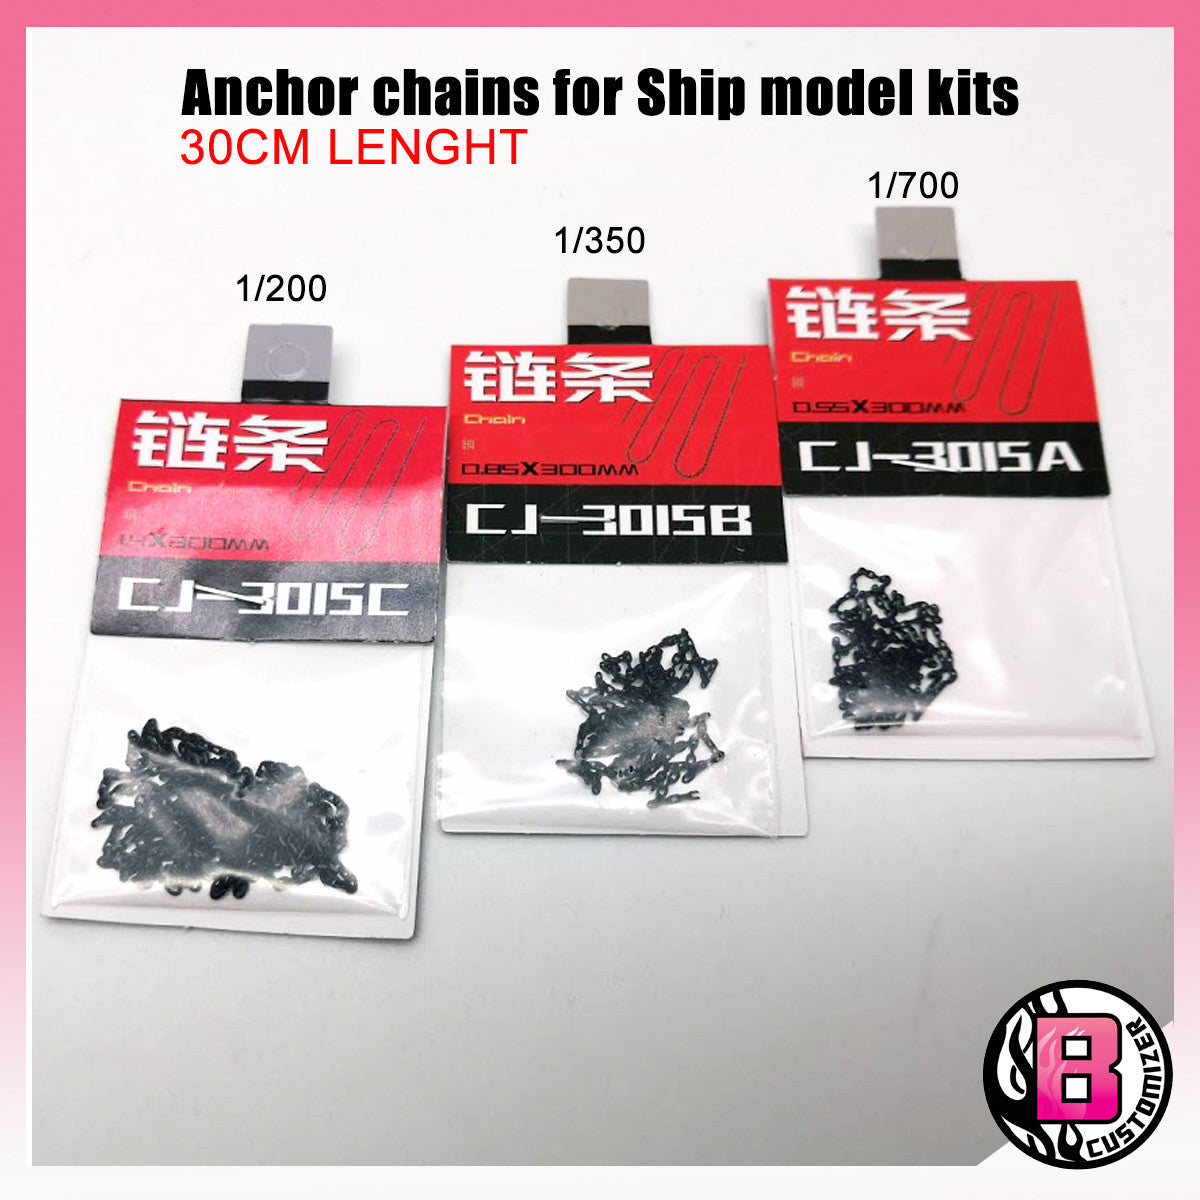 Anchor chains for ship models (1/700 scale to 1/200 scale)